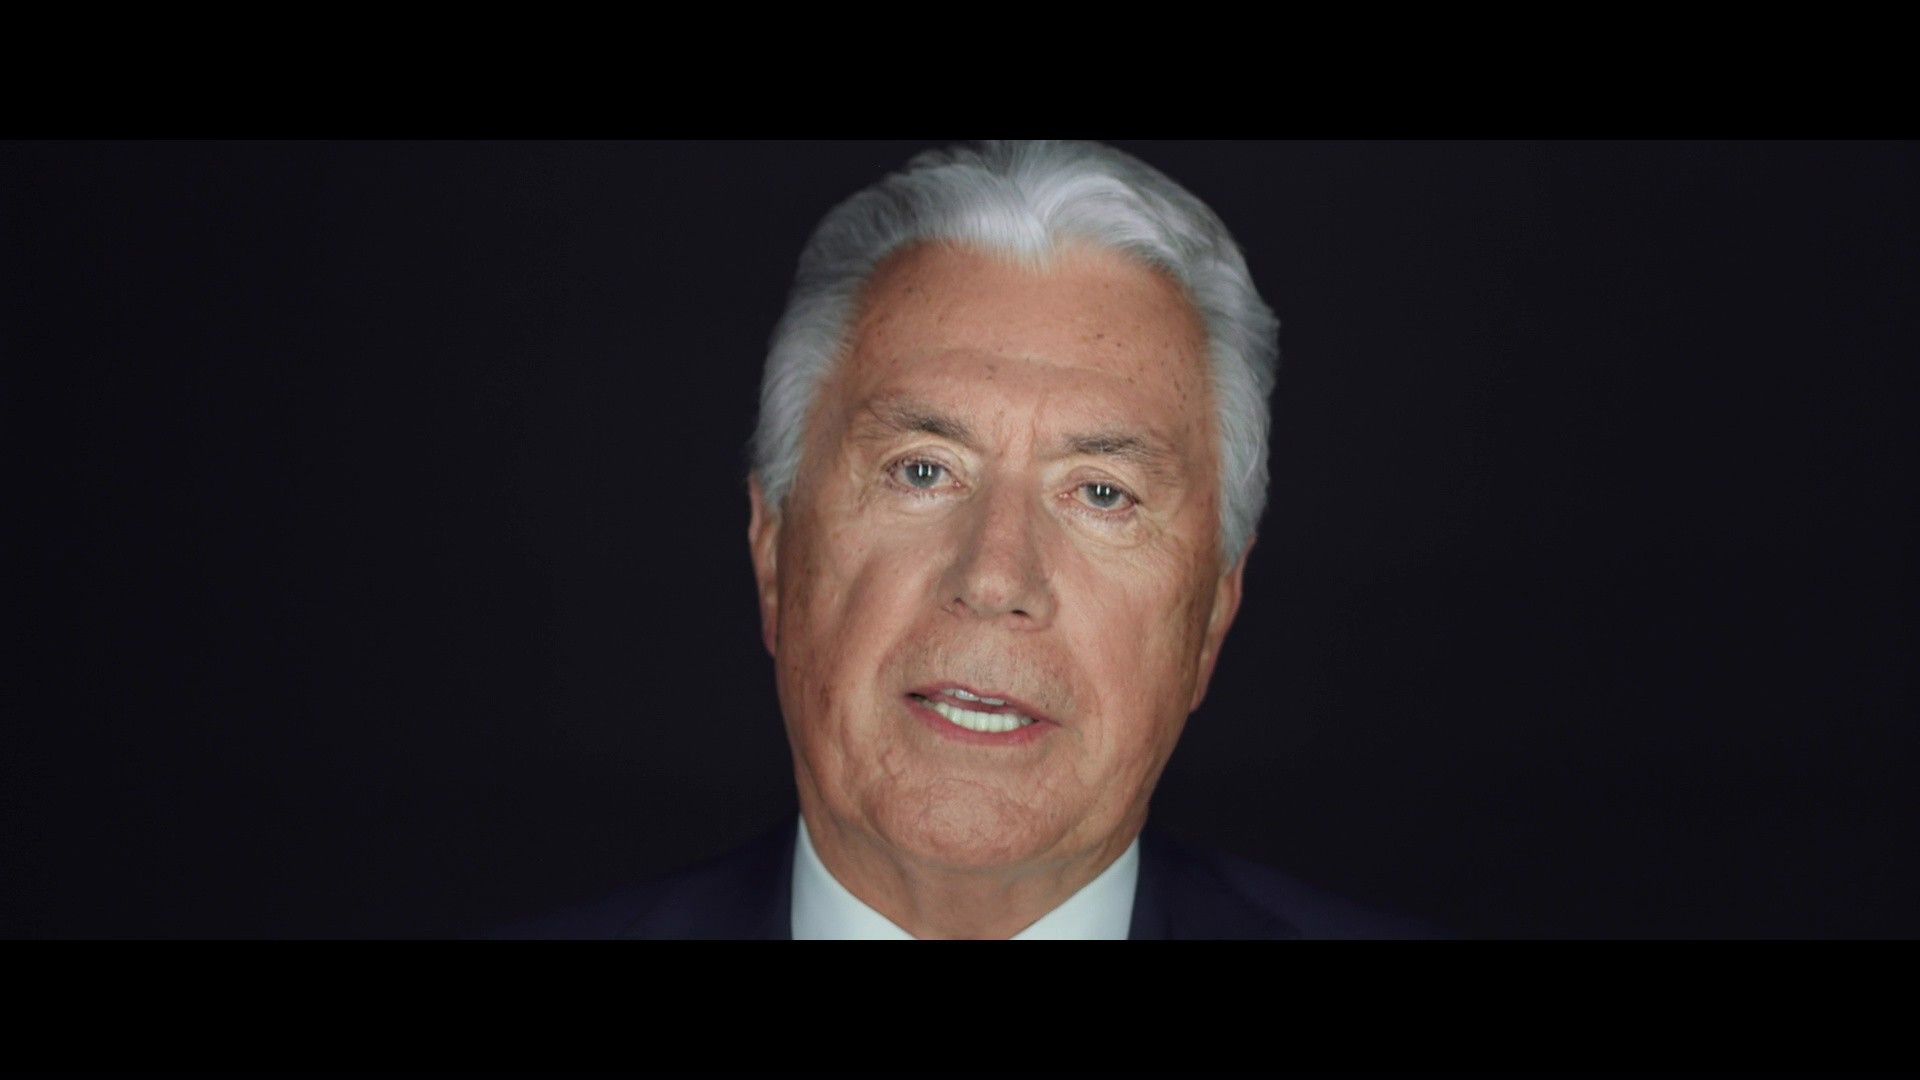 How do you #HearHim? Elder Dieter F. Uchtdorf says love is a bridge that connects him to the Savior Jesus Christ